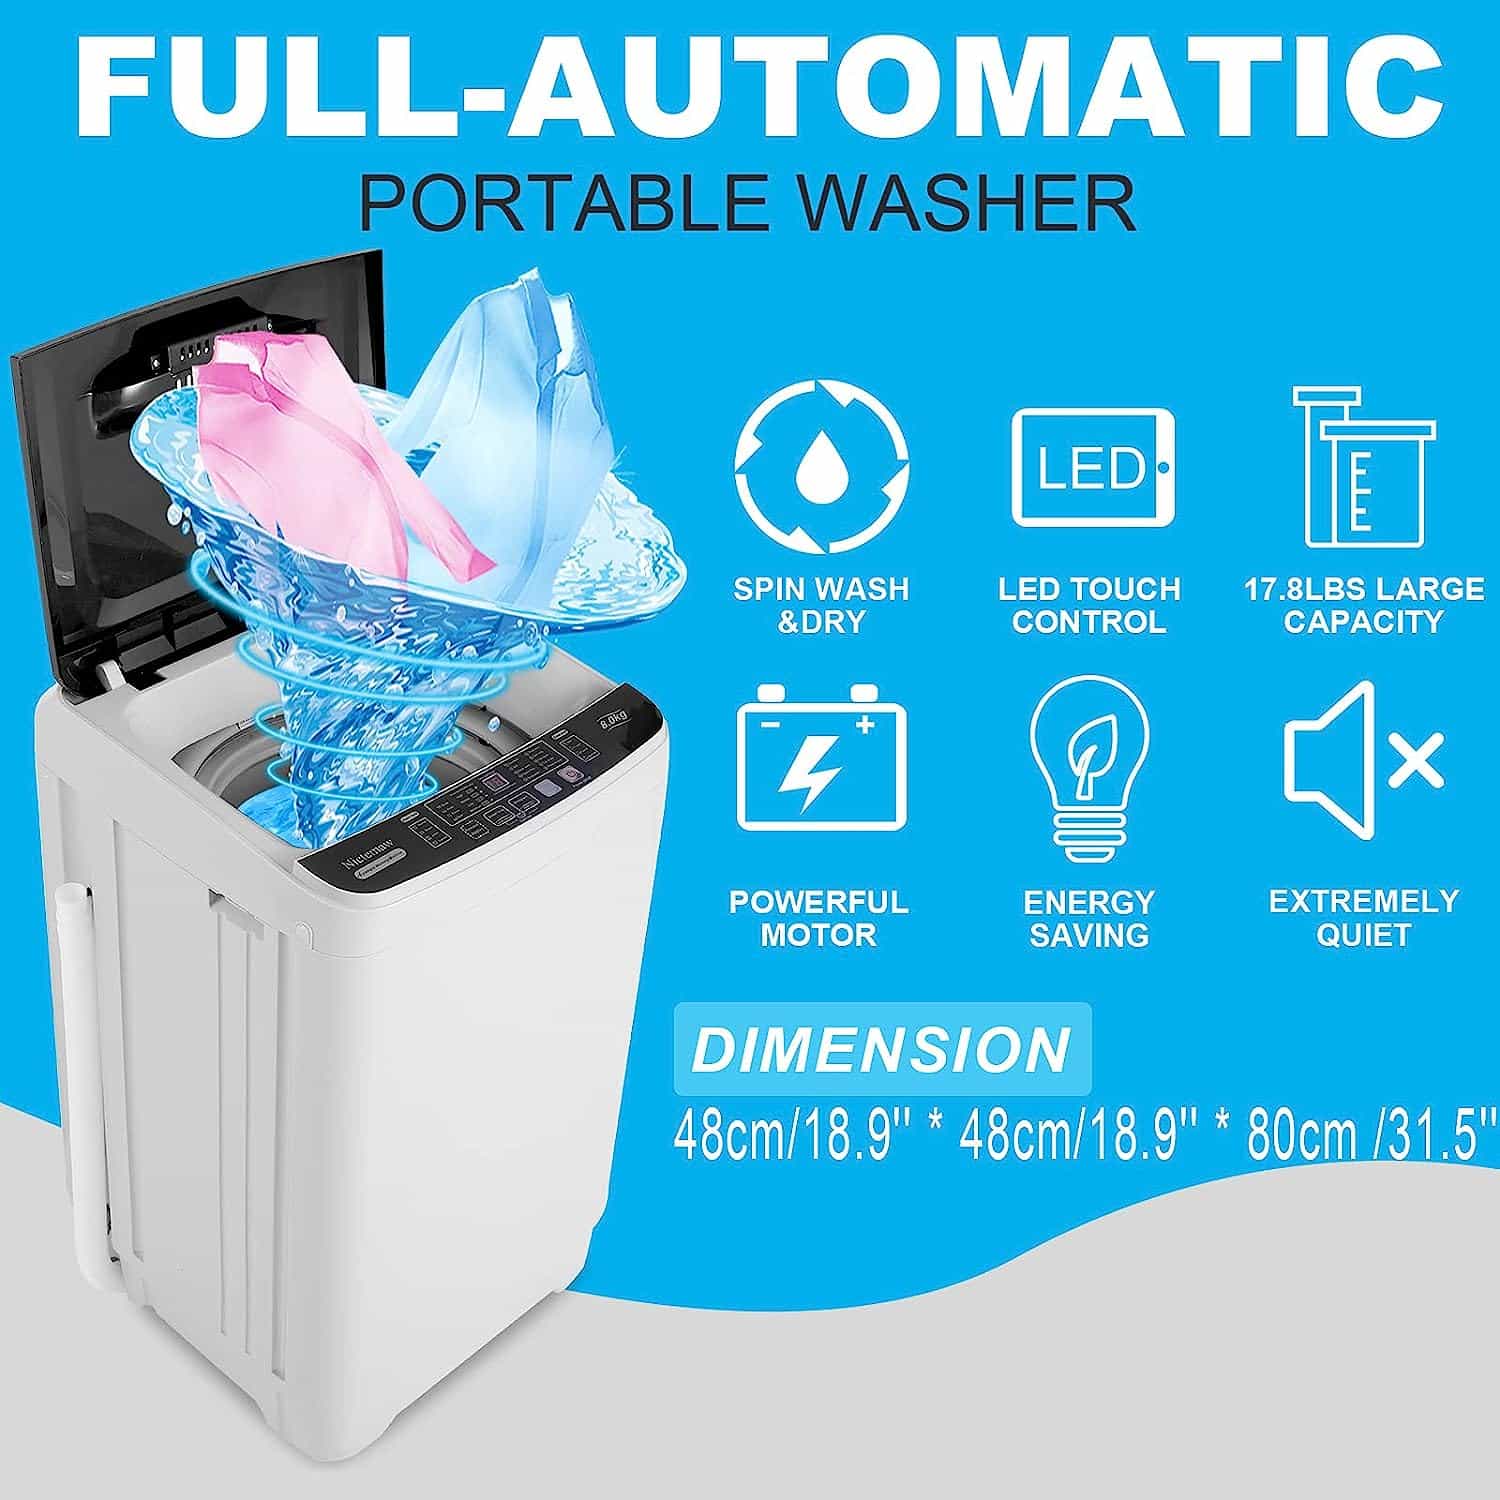 Compact and Efficient Portable Washing Machine Review